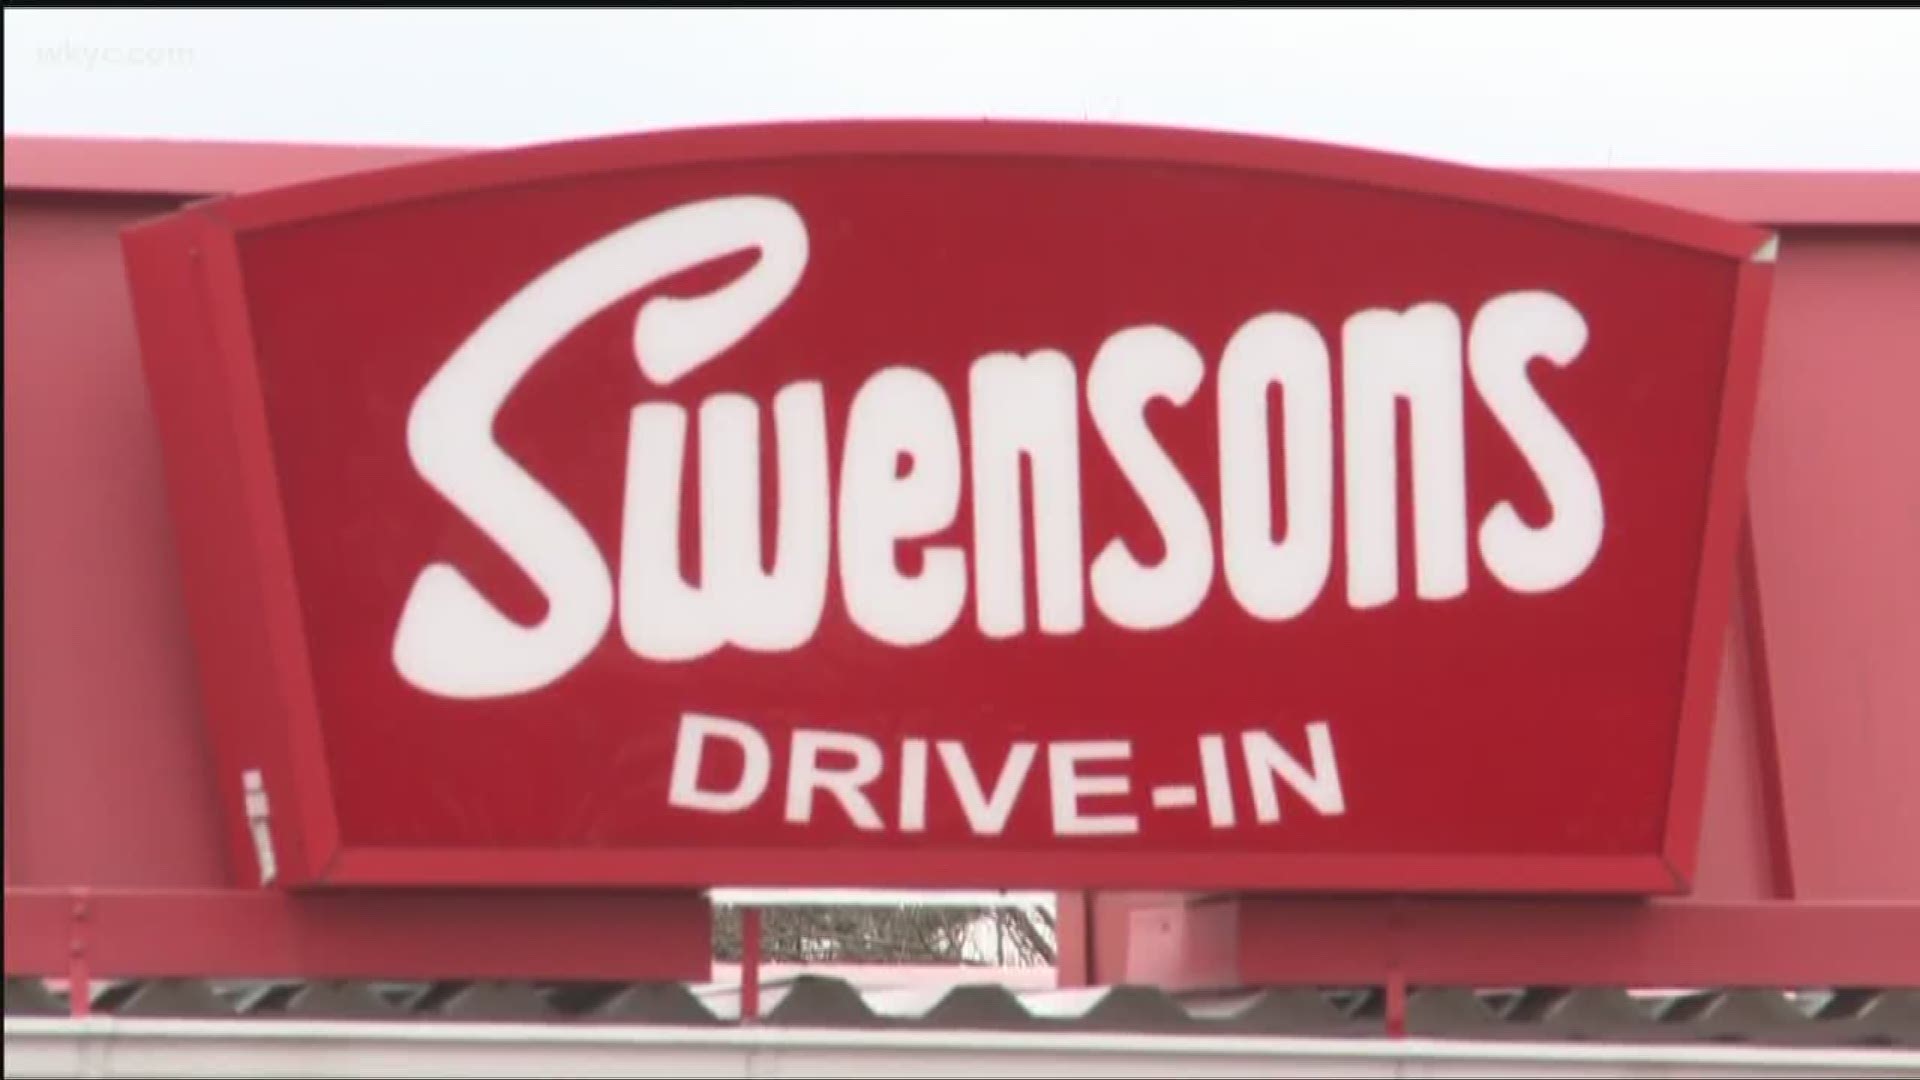 Swensons is expanding once again. This time the iconic Akron-based burger joint is building a new location in Brooklyn on Brookpark Road.